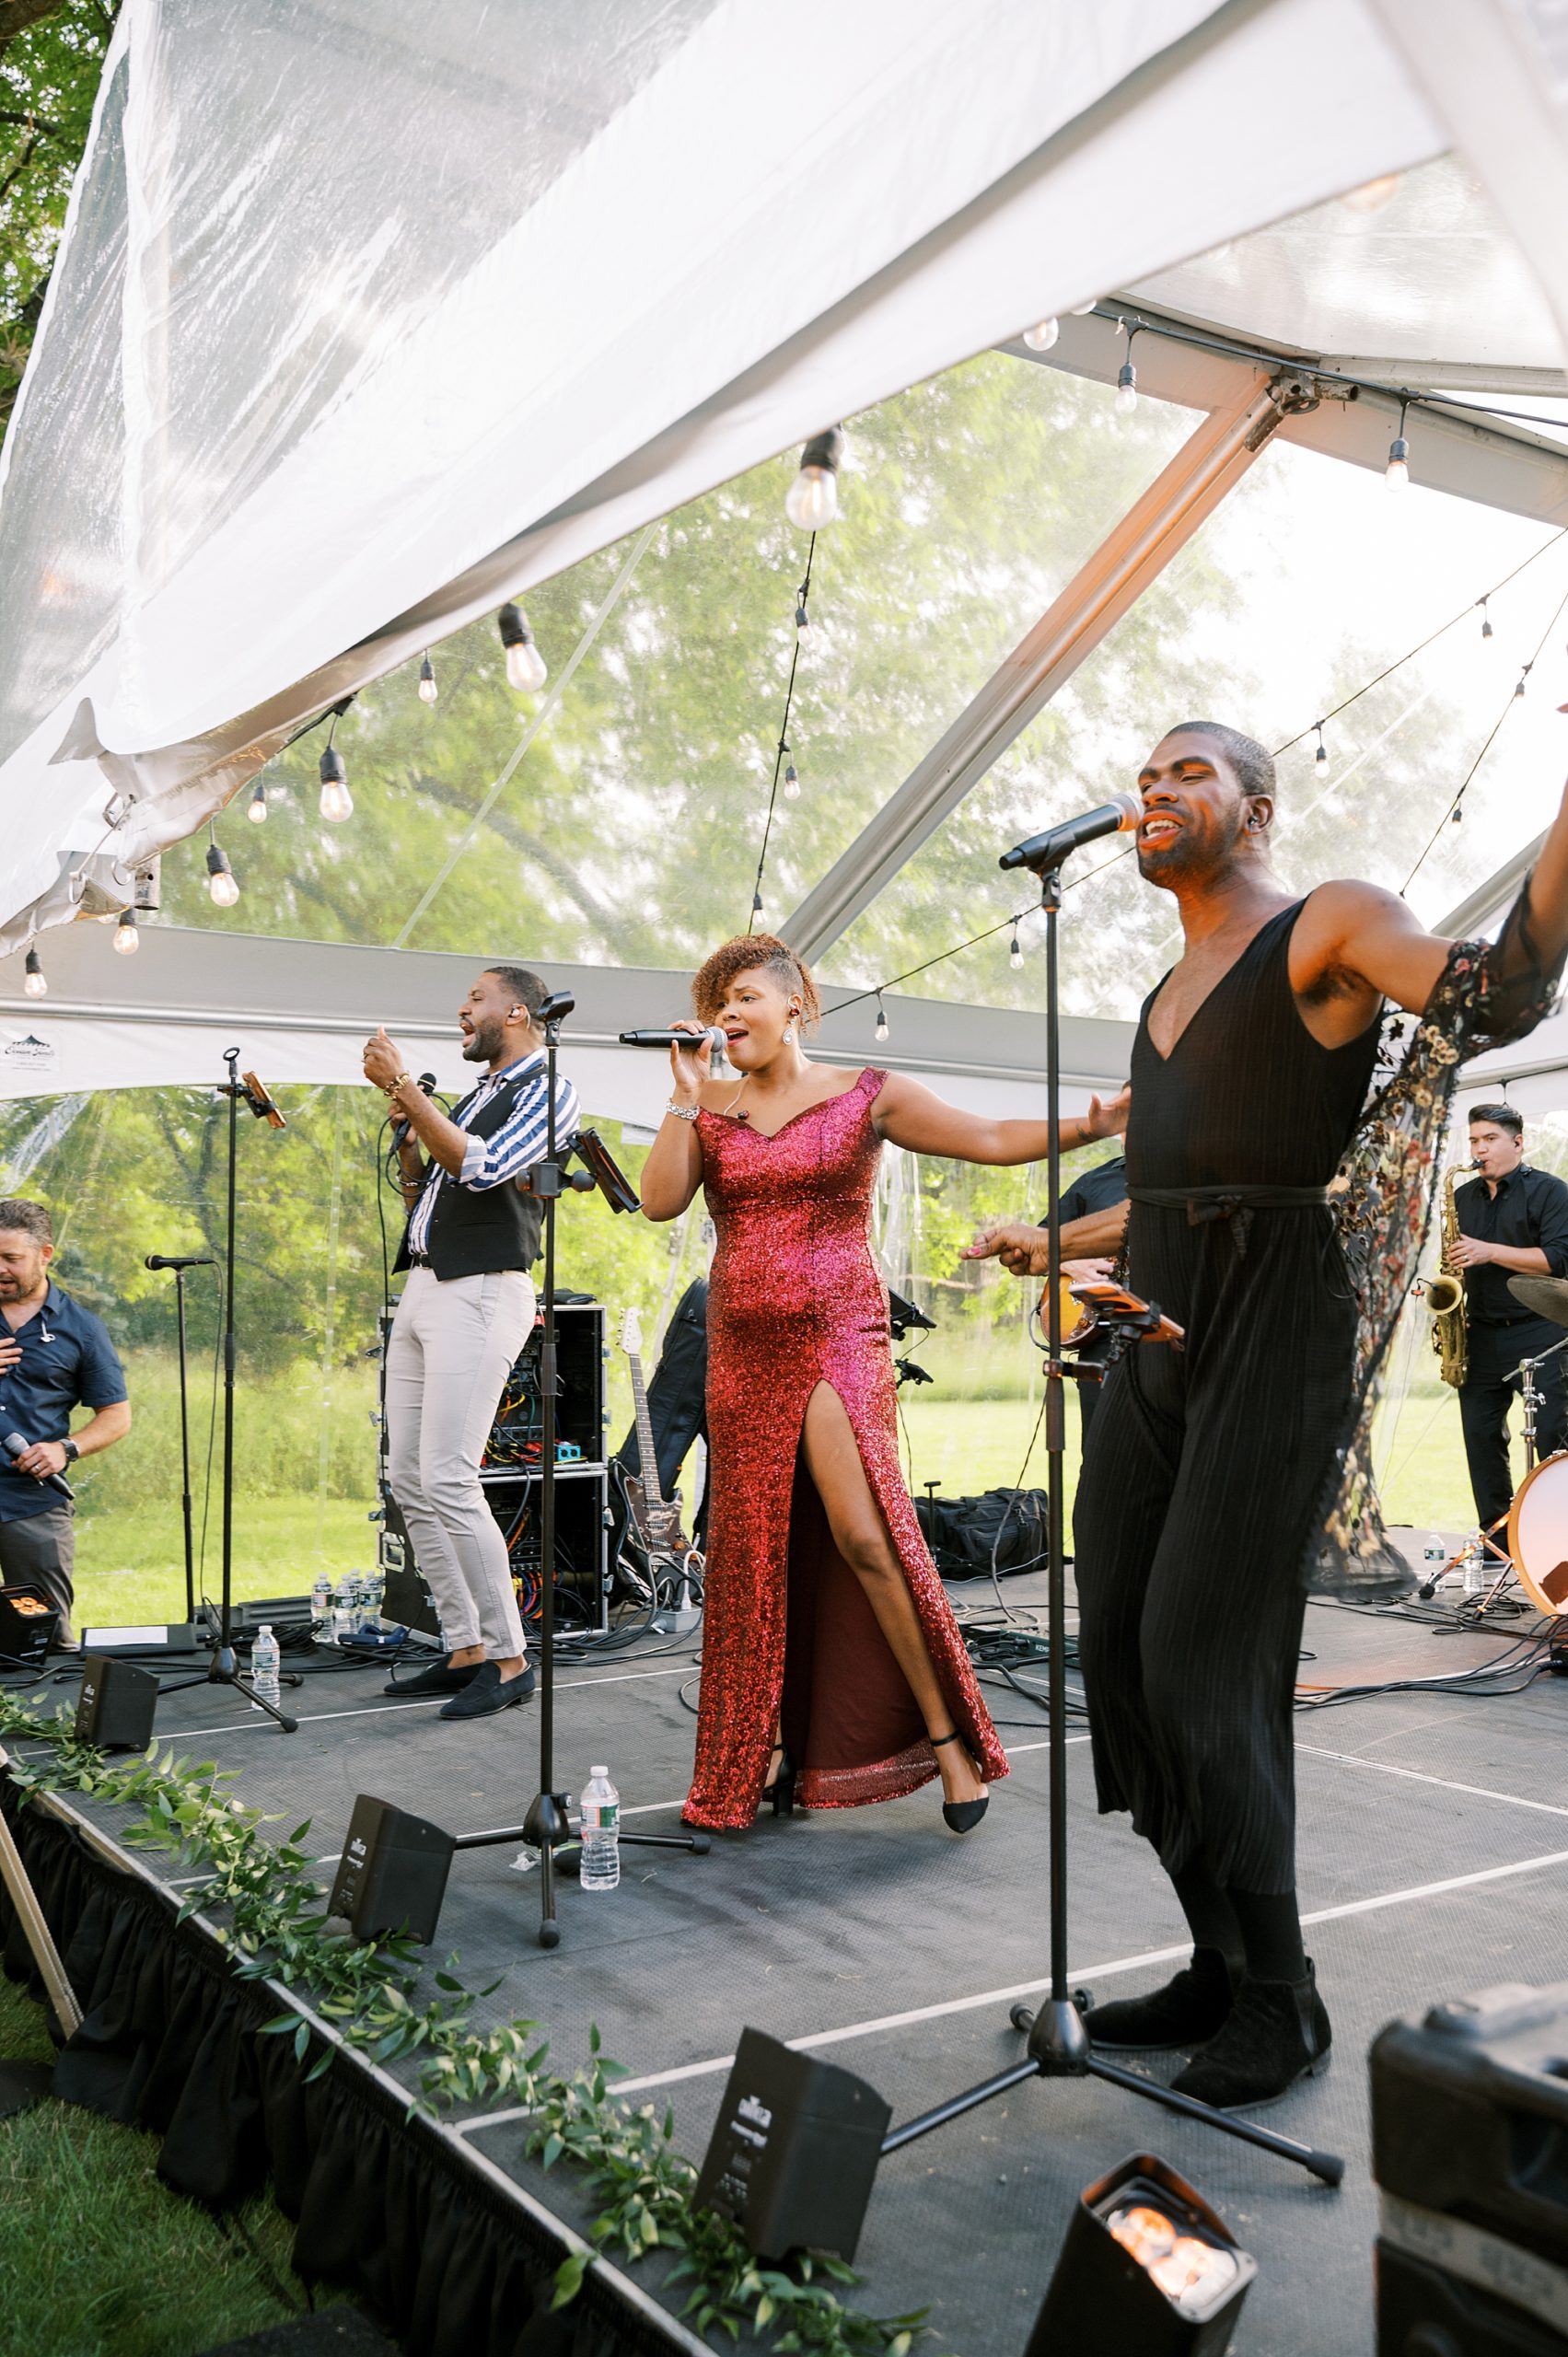 band performs during tented wedding reception at Willowwood Arboretum